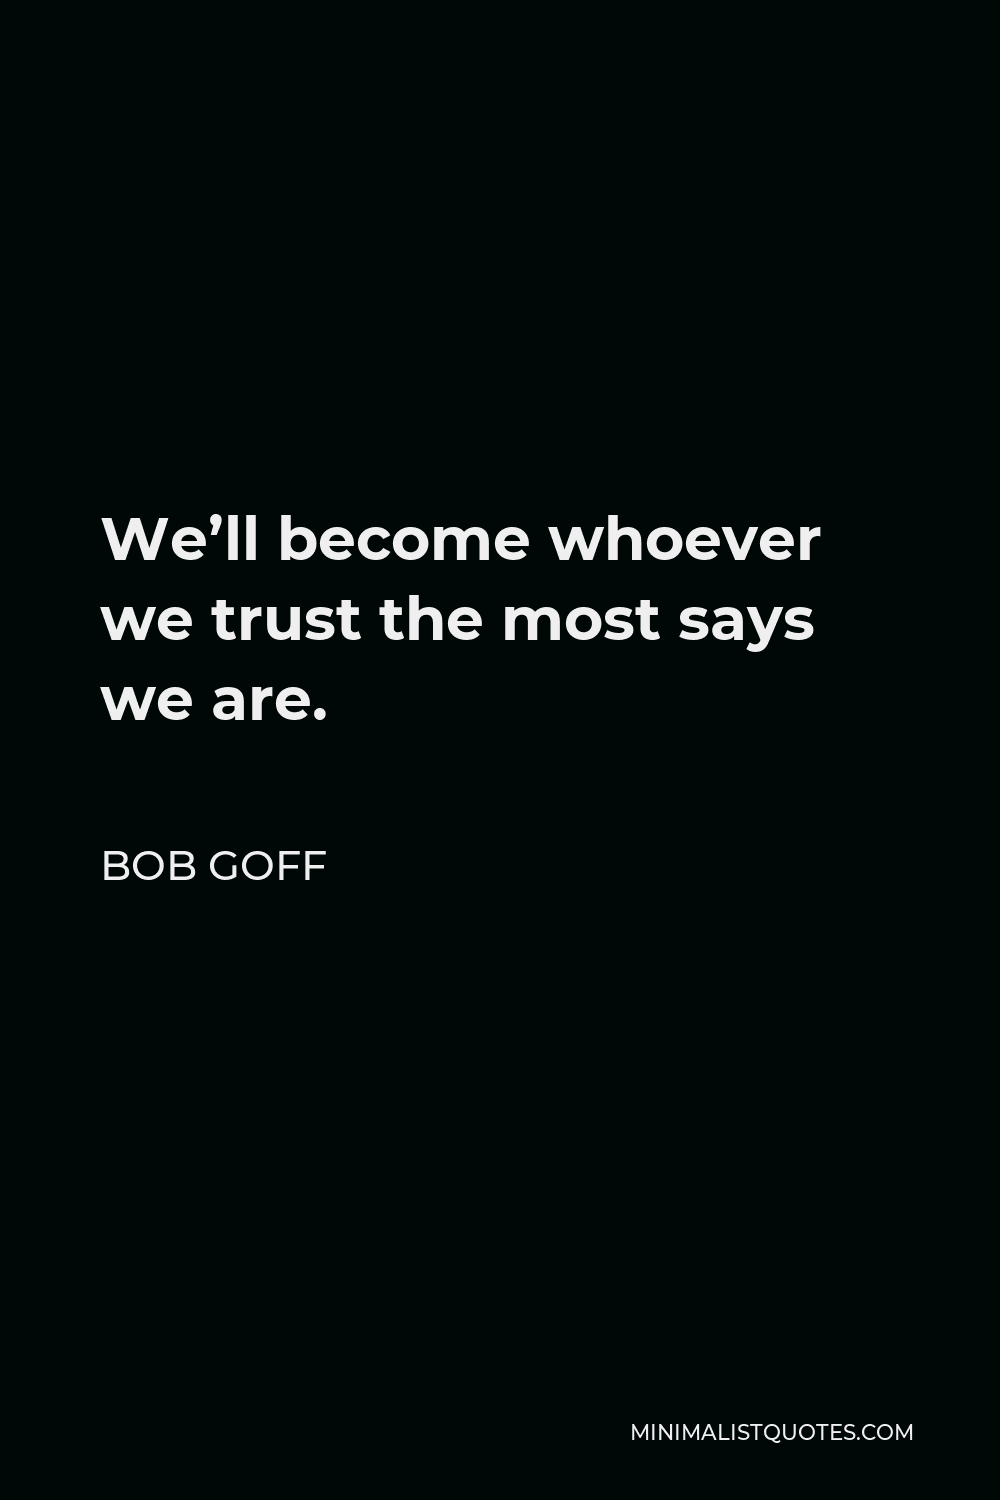 Bob Goff Quote - We’ll become whoever we trust the most says we are.